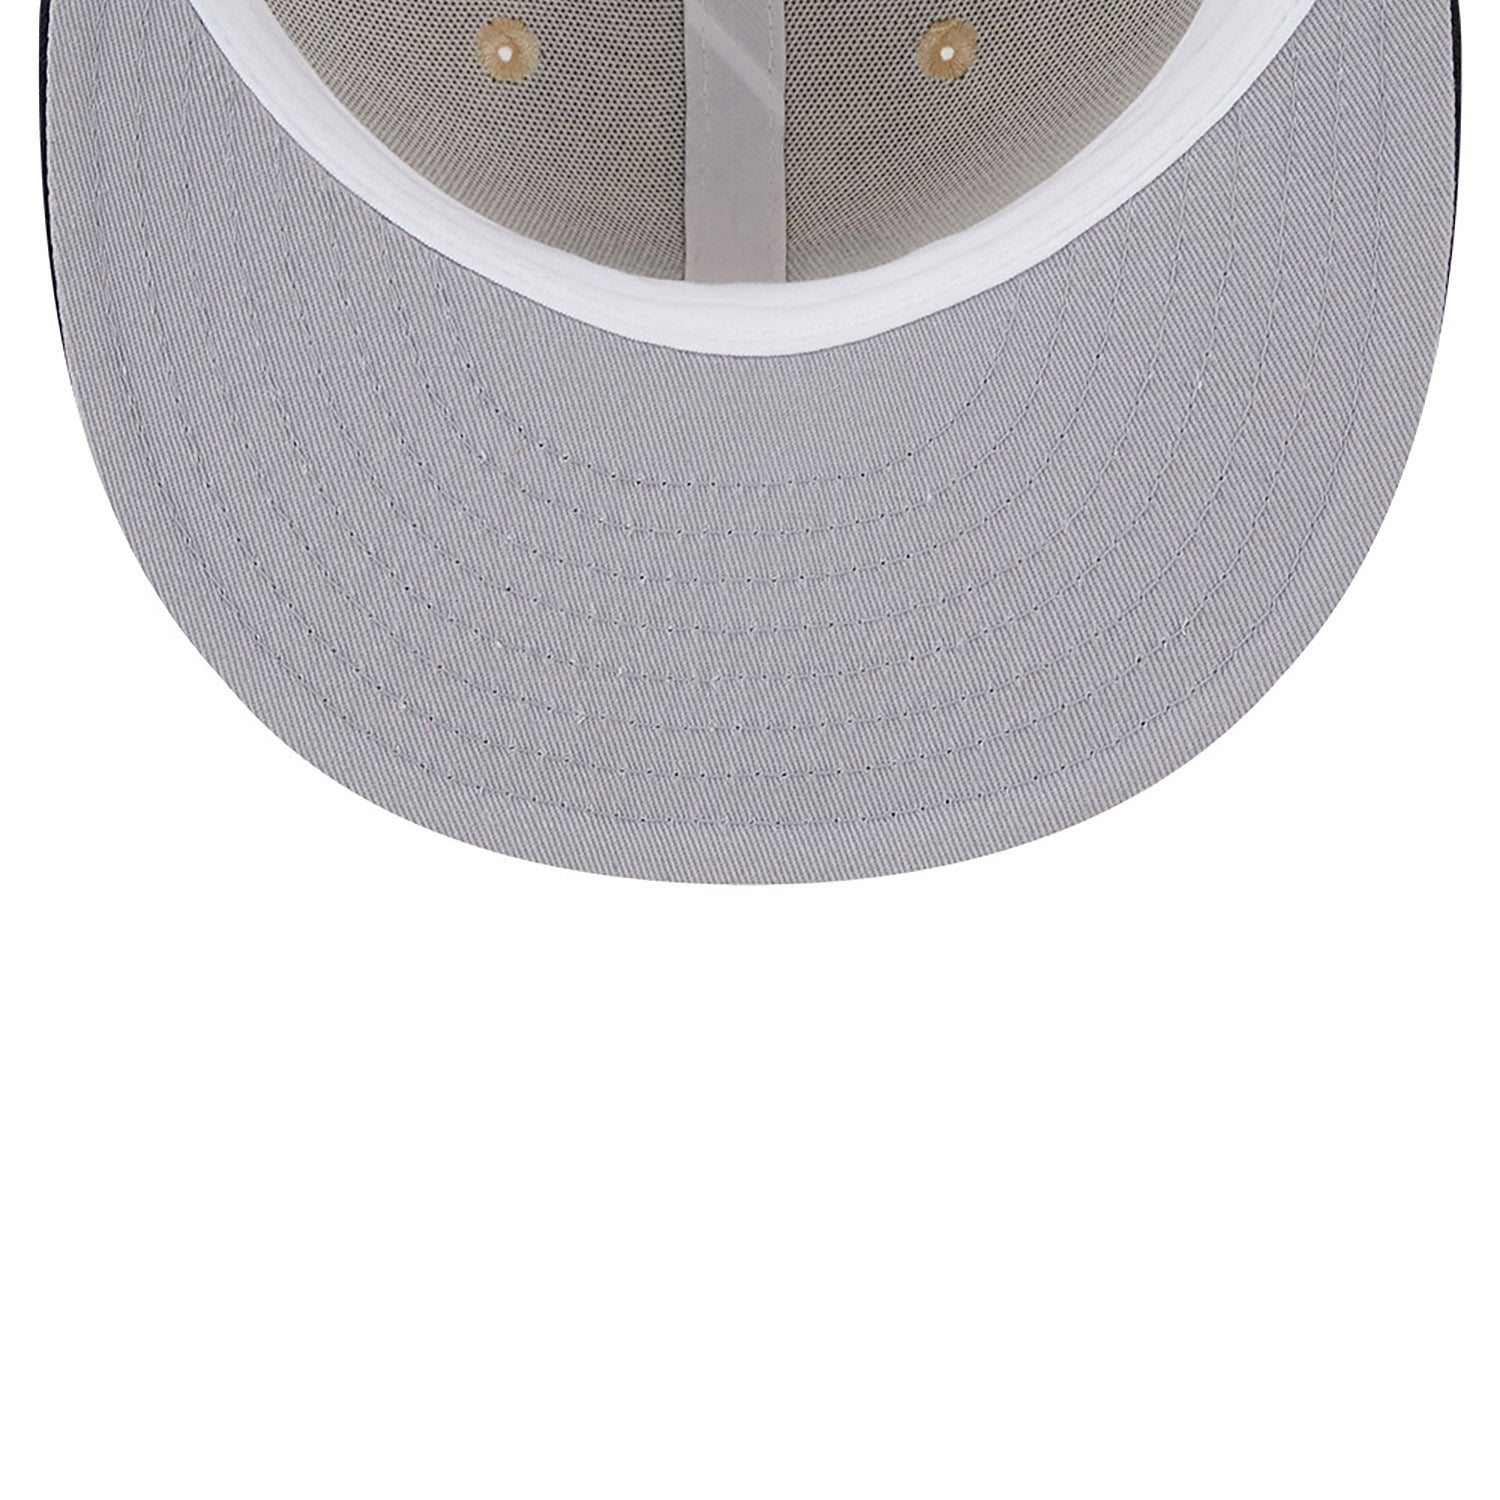 NEW ERA 59FIFTY MLB CHICAGO WHITE SOX TWO TONE / GREY UV FITTED CAP – FAM